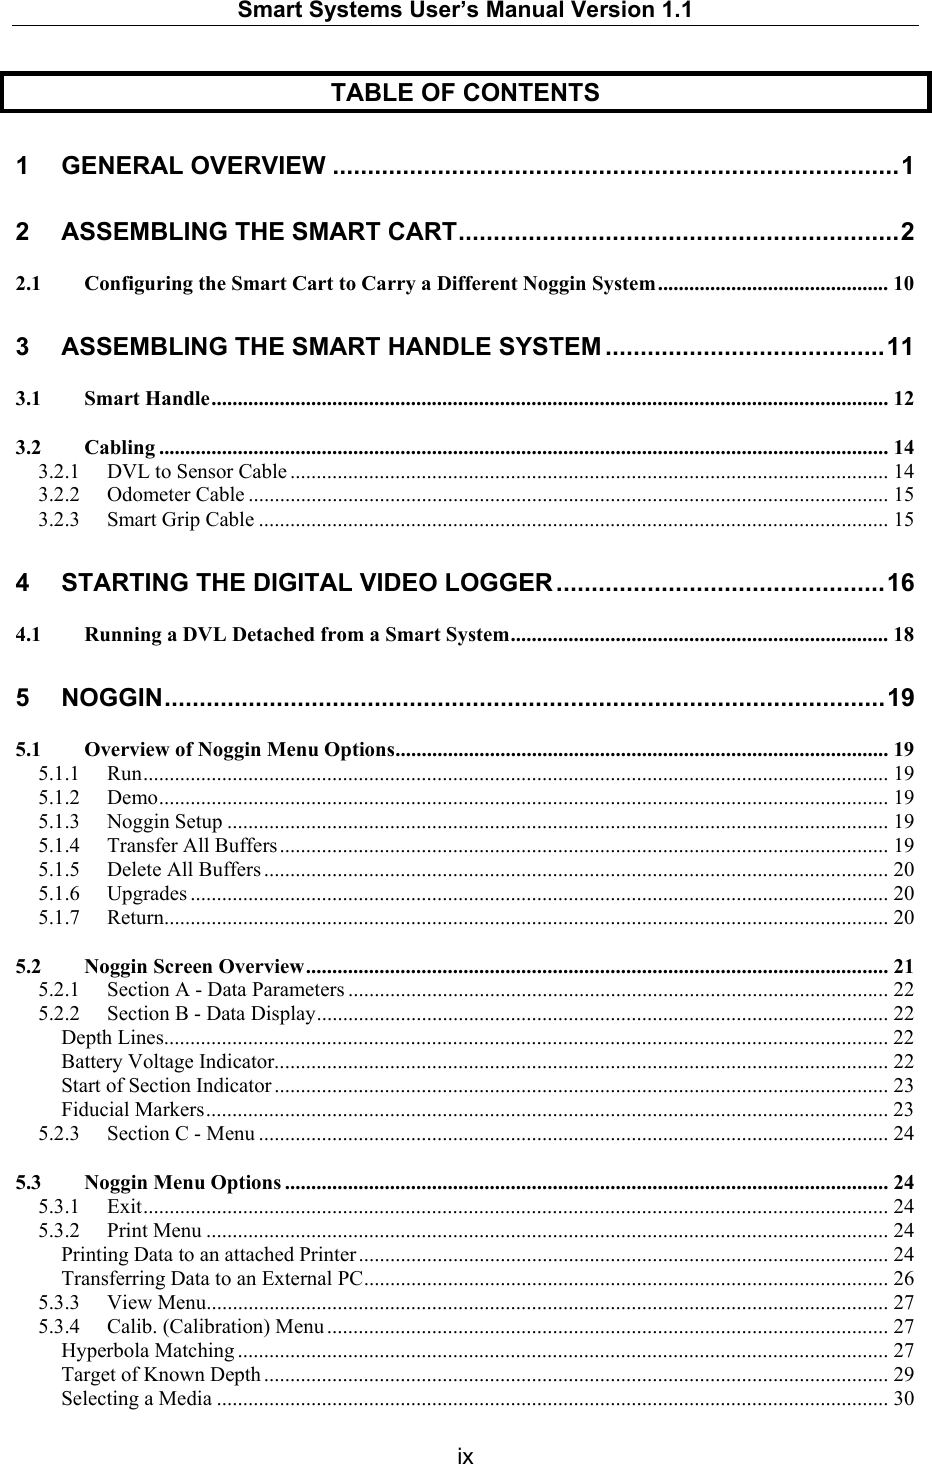   Smart Systems User’s Manual Version 1.1  ix  TABLE OF CONTENTS 1 GENERAL OVERVIEW .................................................................................1 2 ASSEMBLING THE SMART CART...............................................................2 2.1 Configuring the Smart Cart to Carry a Different Noggin System............................................ 10 3 ASSEMBLING THE SMART HANDLE SYSTEM ........................................11 3.1 Smart Handle................................................................................................................................. 12 3.2 Cabling ........................................................................................................................................... 14 3.2.1 DVL to Sensor Cable .................................................................................................................. 14 3.2.2 Odometer Cable .......................................................................................................................... 15 3.2.3 Smart Grip Cable ........................................................................................................................ 15 4 STARTING THE DIGITAL VIDEO LOGGER ...............................................16 4.1 Running a DVL Detached from a Smart System........................................................................ 18 5 NOGGIN.......................................................................................................19 5.1 Overview of Noggin Menu Options.............................................................................................. 19 5.1.1 Run.............................................................................................................................................. 19 5.1.2 Demo........................................................................................................................................... 19 5.1.3 Noggin Setup .............................................................................................................................. 19 5.1.4 Transfer All Buffers.................................................................................................................... 19 5.1.5 Delete All Buffers ....................................................................................................................... 20 5.1.6 Upgrades ..................................................................................................................................... 20 5.1.7 Return.......................................................................................................................................... 20 5.2 Noggin Screen Overview............................................................................................................... 21 5.2.1 Section A - Data Parameters ....................................................................................................... 22 5.2.2 Section B - Data Display............................................................................................................. 22 Depth Lines.......................................................................................................................................... 22 Battery Voltage Indicator..................................................................................................................... 22 Start of Section Indicator ..................................................................................................................... 23 Fiducial Markers.................................................................................................................................. 23 5.2.3 Section C - Menu ........................................................................................................................ 24 5.3 Noggin Menu Options ................................................................................................................... 24 5.3.1 Exit.............................................................................................................................................. 24 5.3.2 Print Menu .................................................................................................................................. 24 Printing Data to an attached Printer..................................................................................................... 24 Transferring Data to an External PC.................................................................................................... 26 5.3.3 View Menu.................................................................................................................................. 27 5.3.4 Calib. (Calibration) Menu ........................................................................................................... 27 Hyperbola Matching ............................................................................................................................ 27 Target of Known Depth ....................................................................................................................... 29 Selecting a Media ................................................................................................................................ 30 